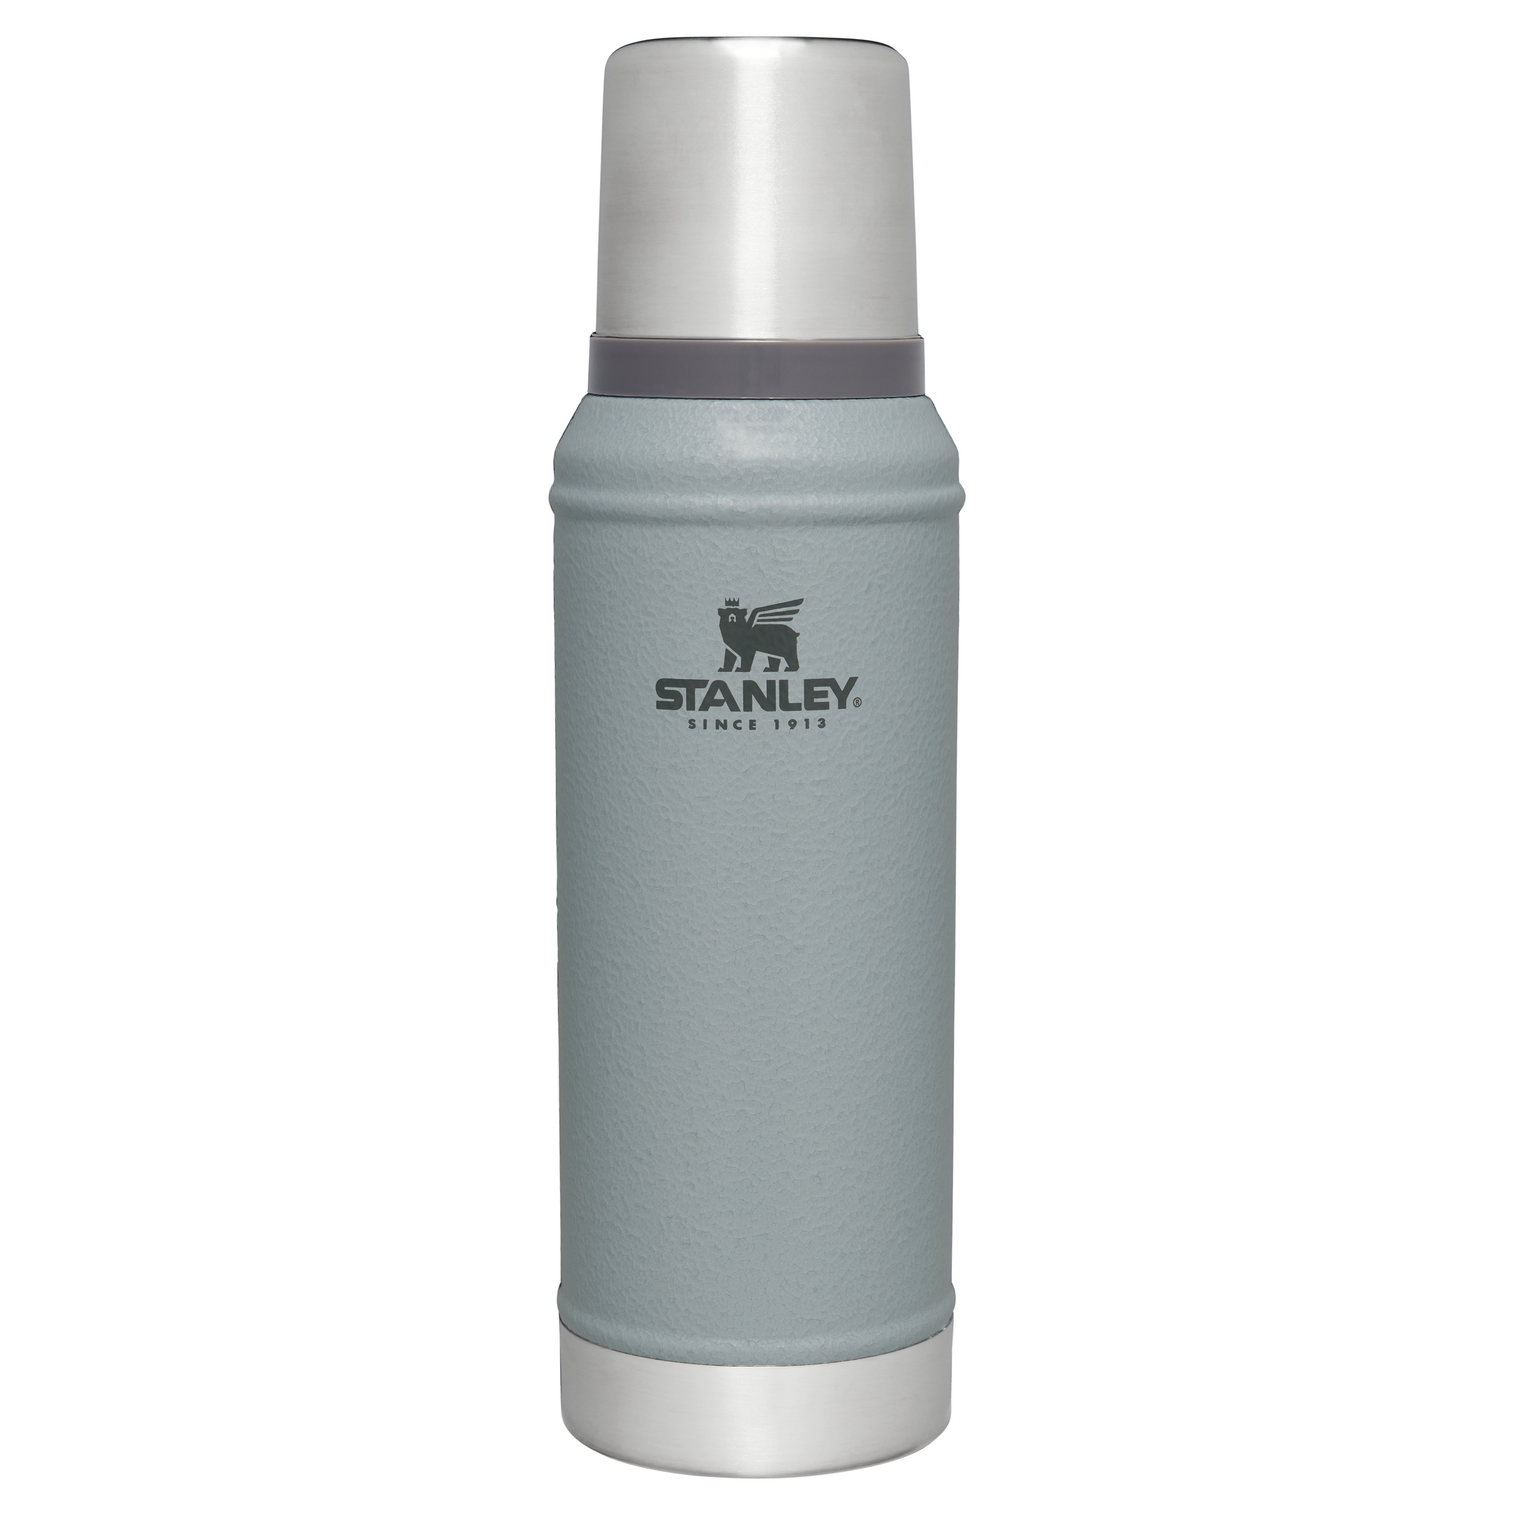 Stanley The Legendary Classic Thermos 750 mL - Ash